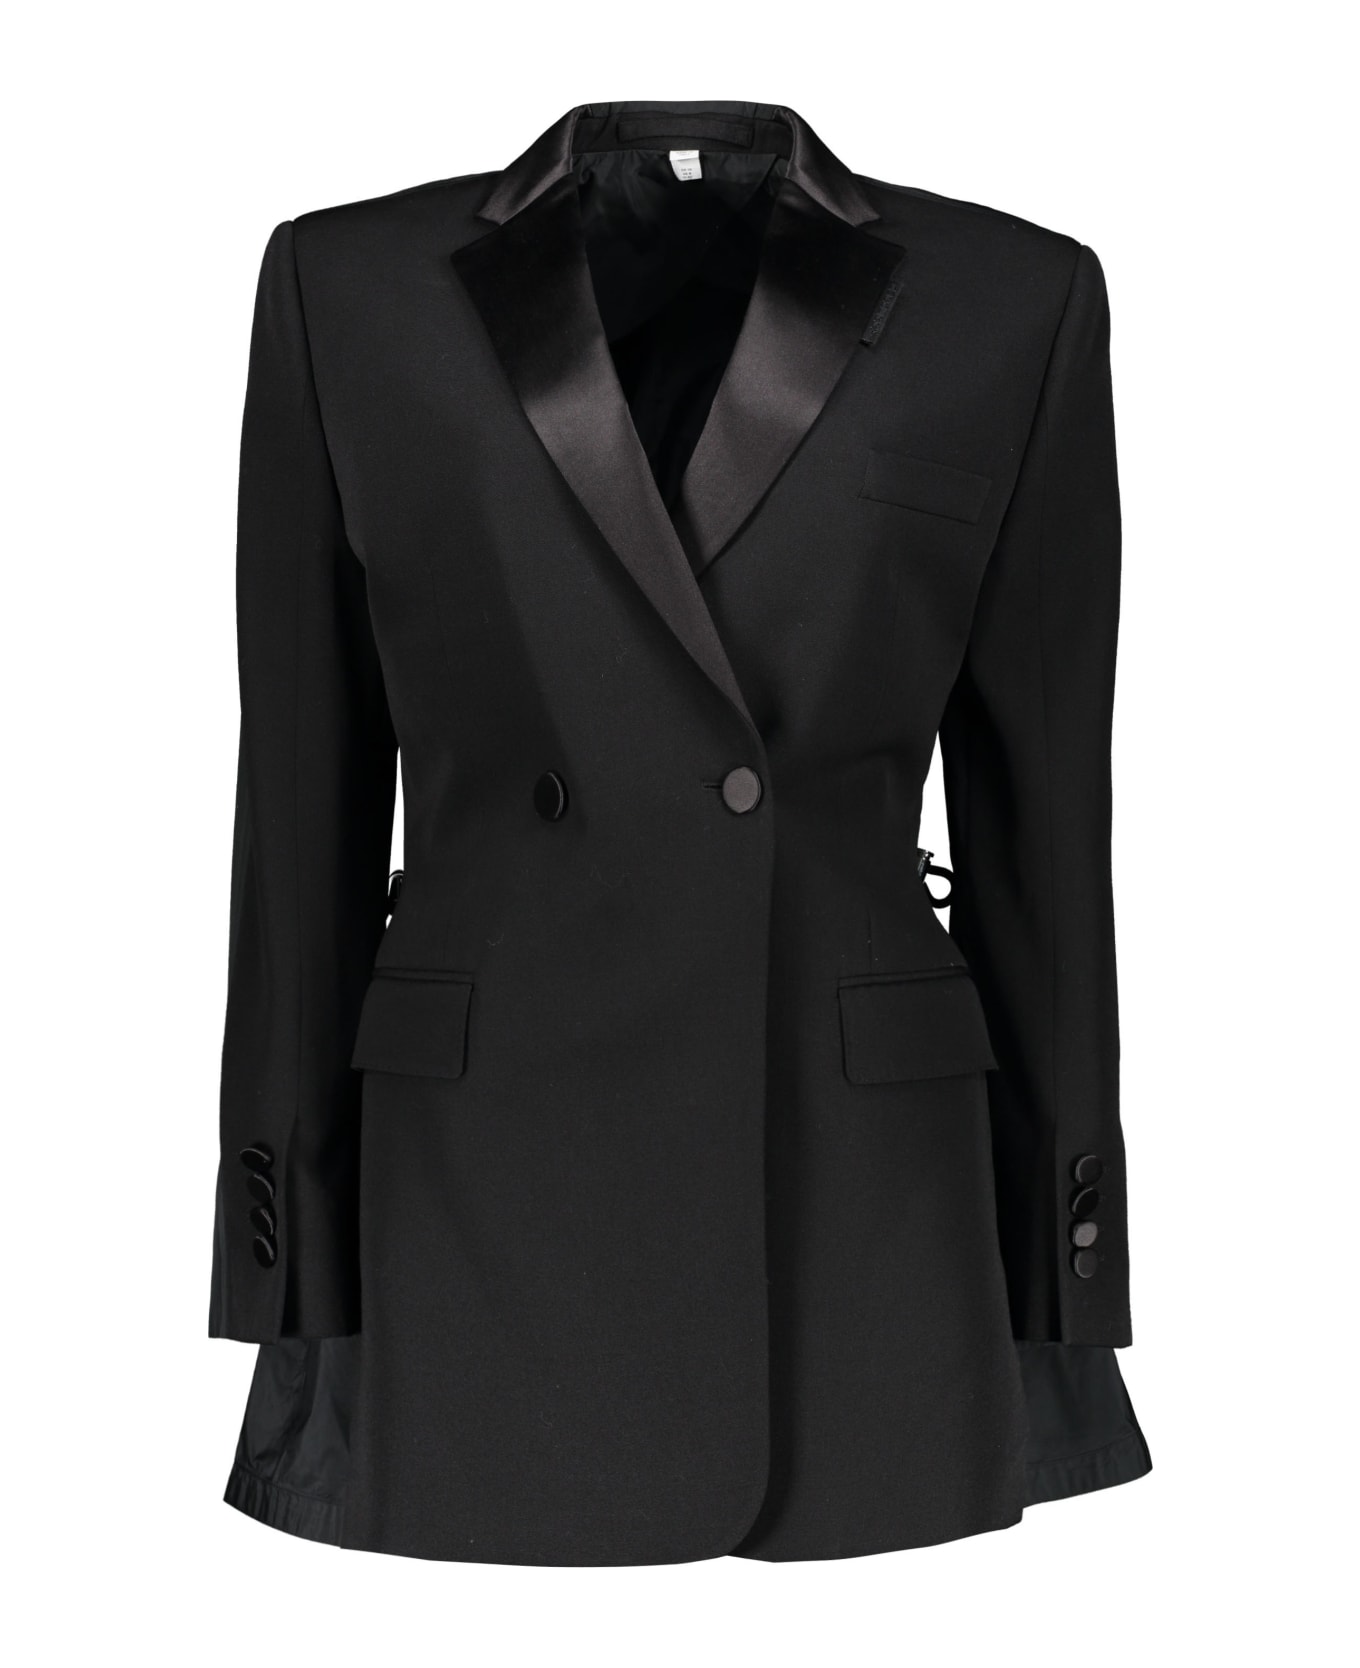 Burberry Double Breasted Blazer - black